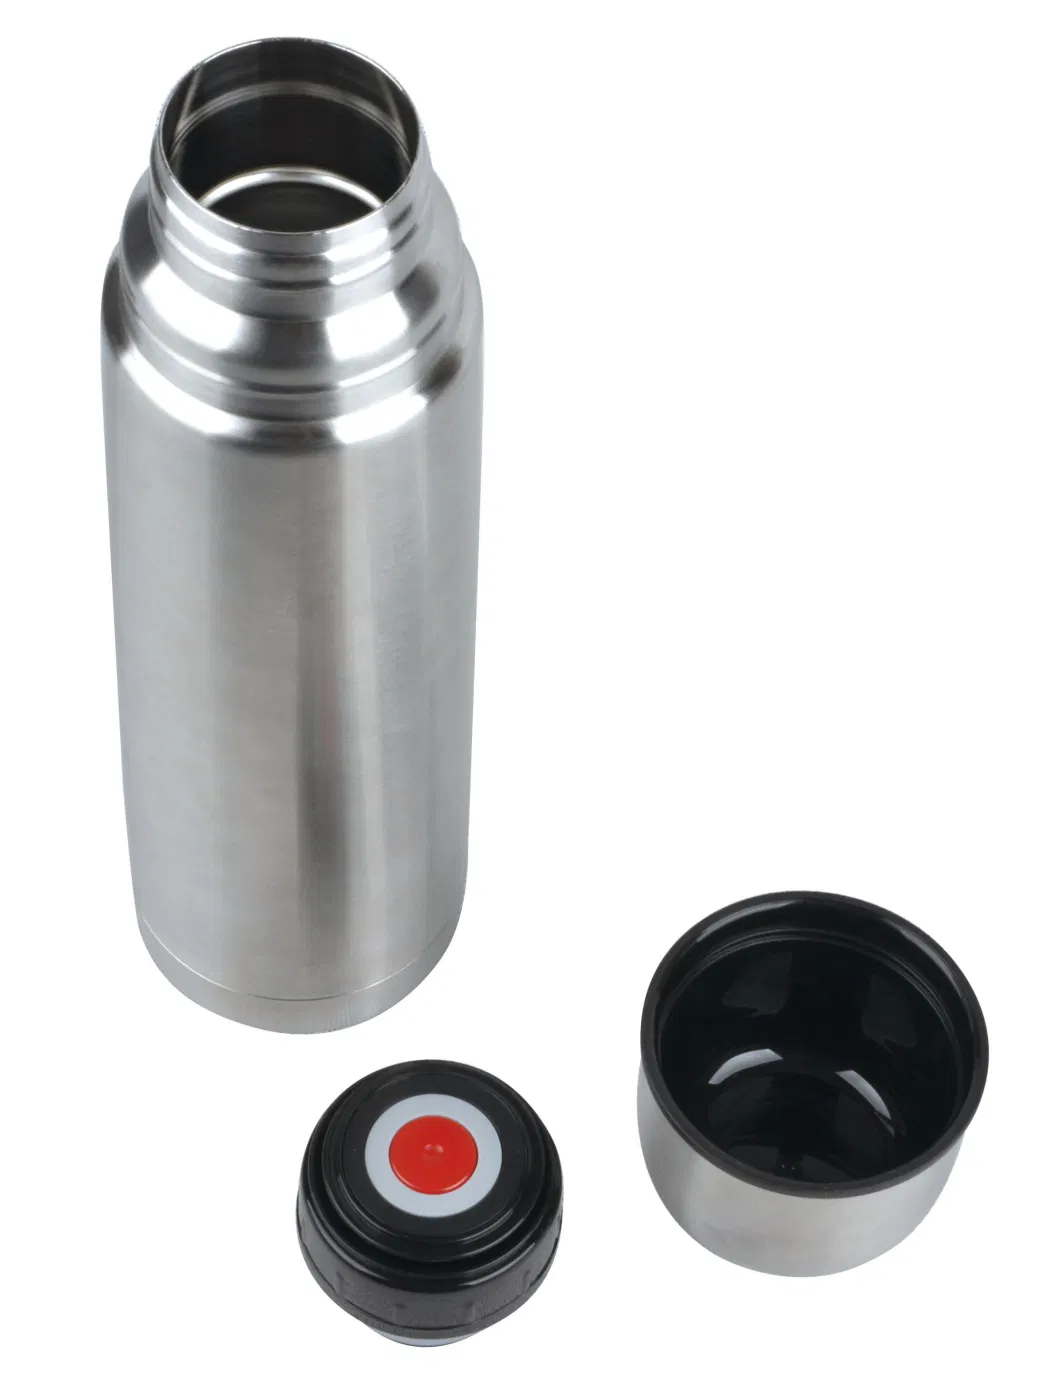 Bullet Thermos Insulated Water Bottles Stainless Steel Vacuum Flask